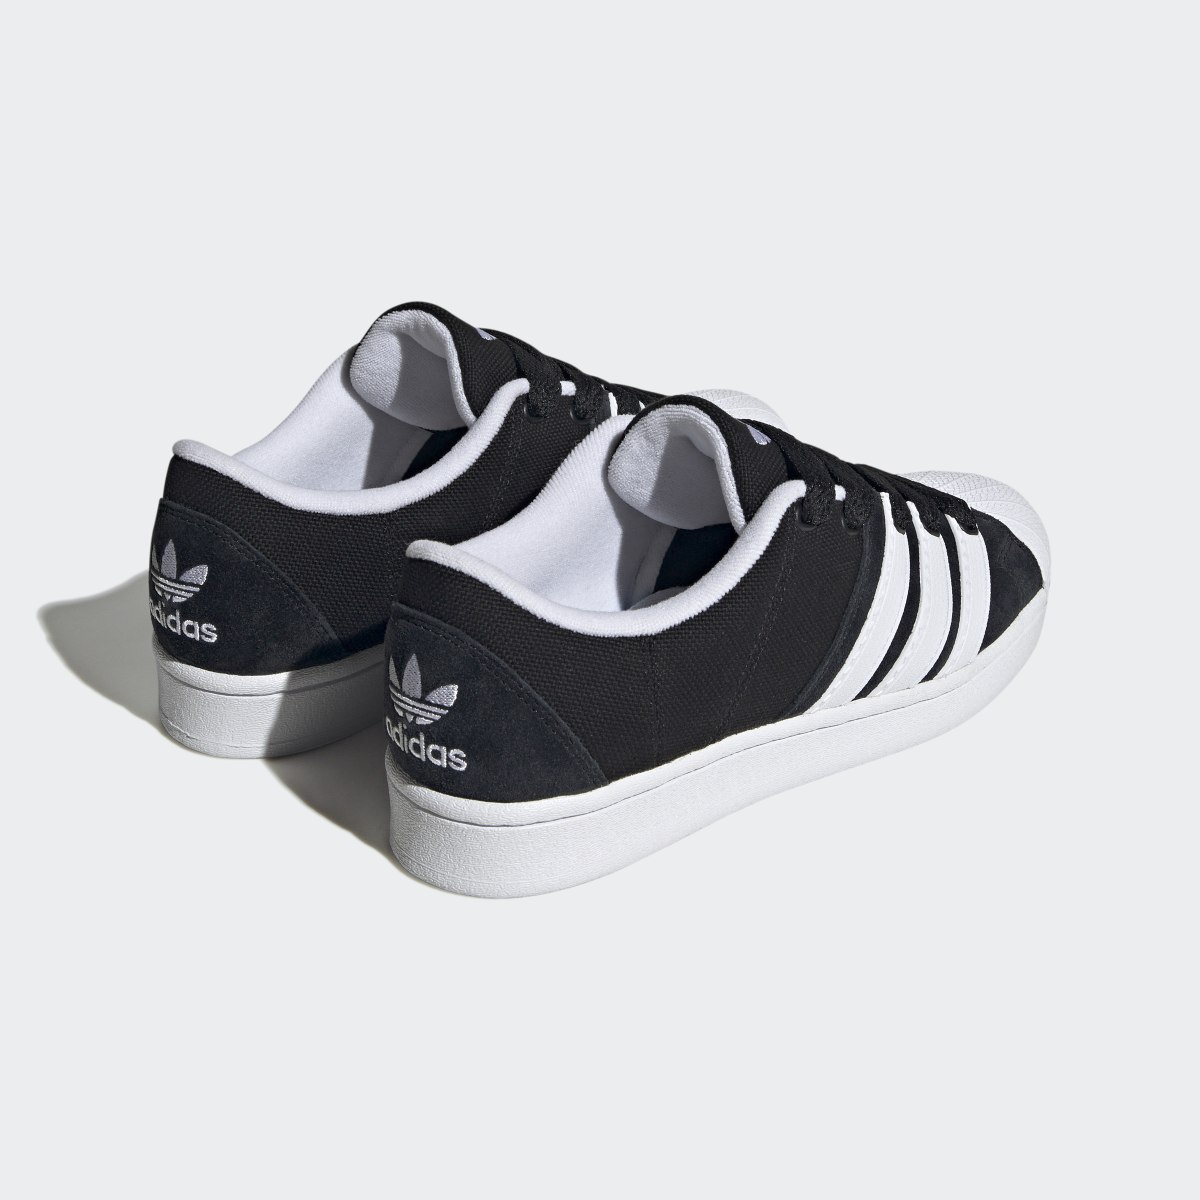 Adidas Superstar Supermodified Shoes. 6